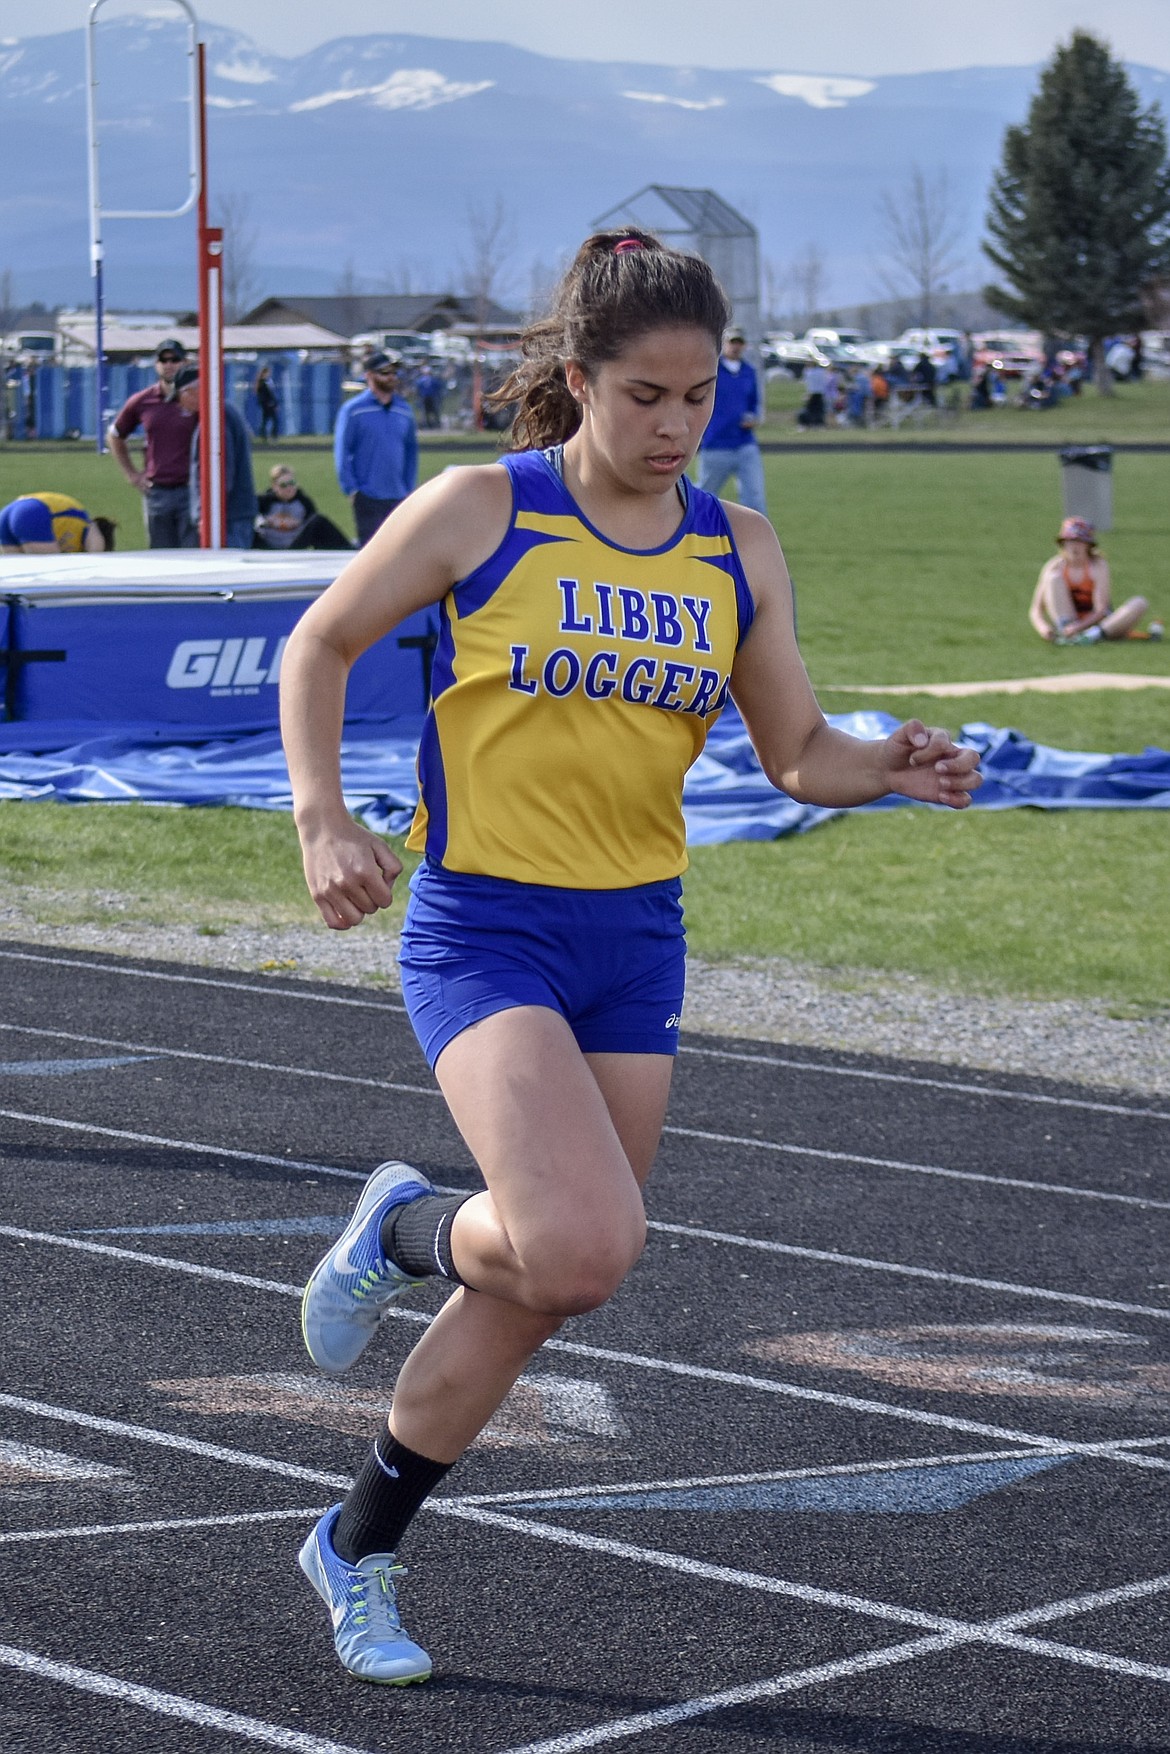 Libby junior Isabella Hollingsworth finishes the 100m hurdles in second place with a season record time of 17.59 seconds at the Lincoln County Track Meet Tuesday. (Benjamin Kibbey/The Western News)